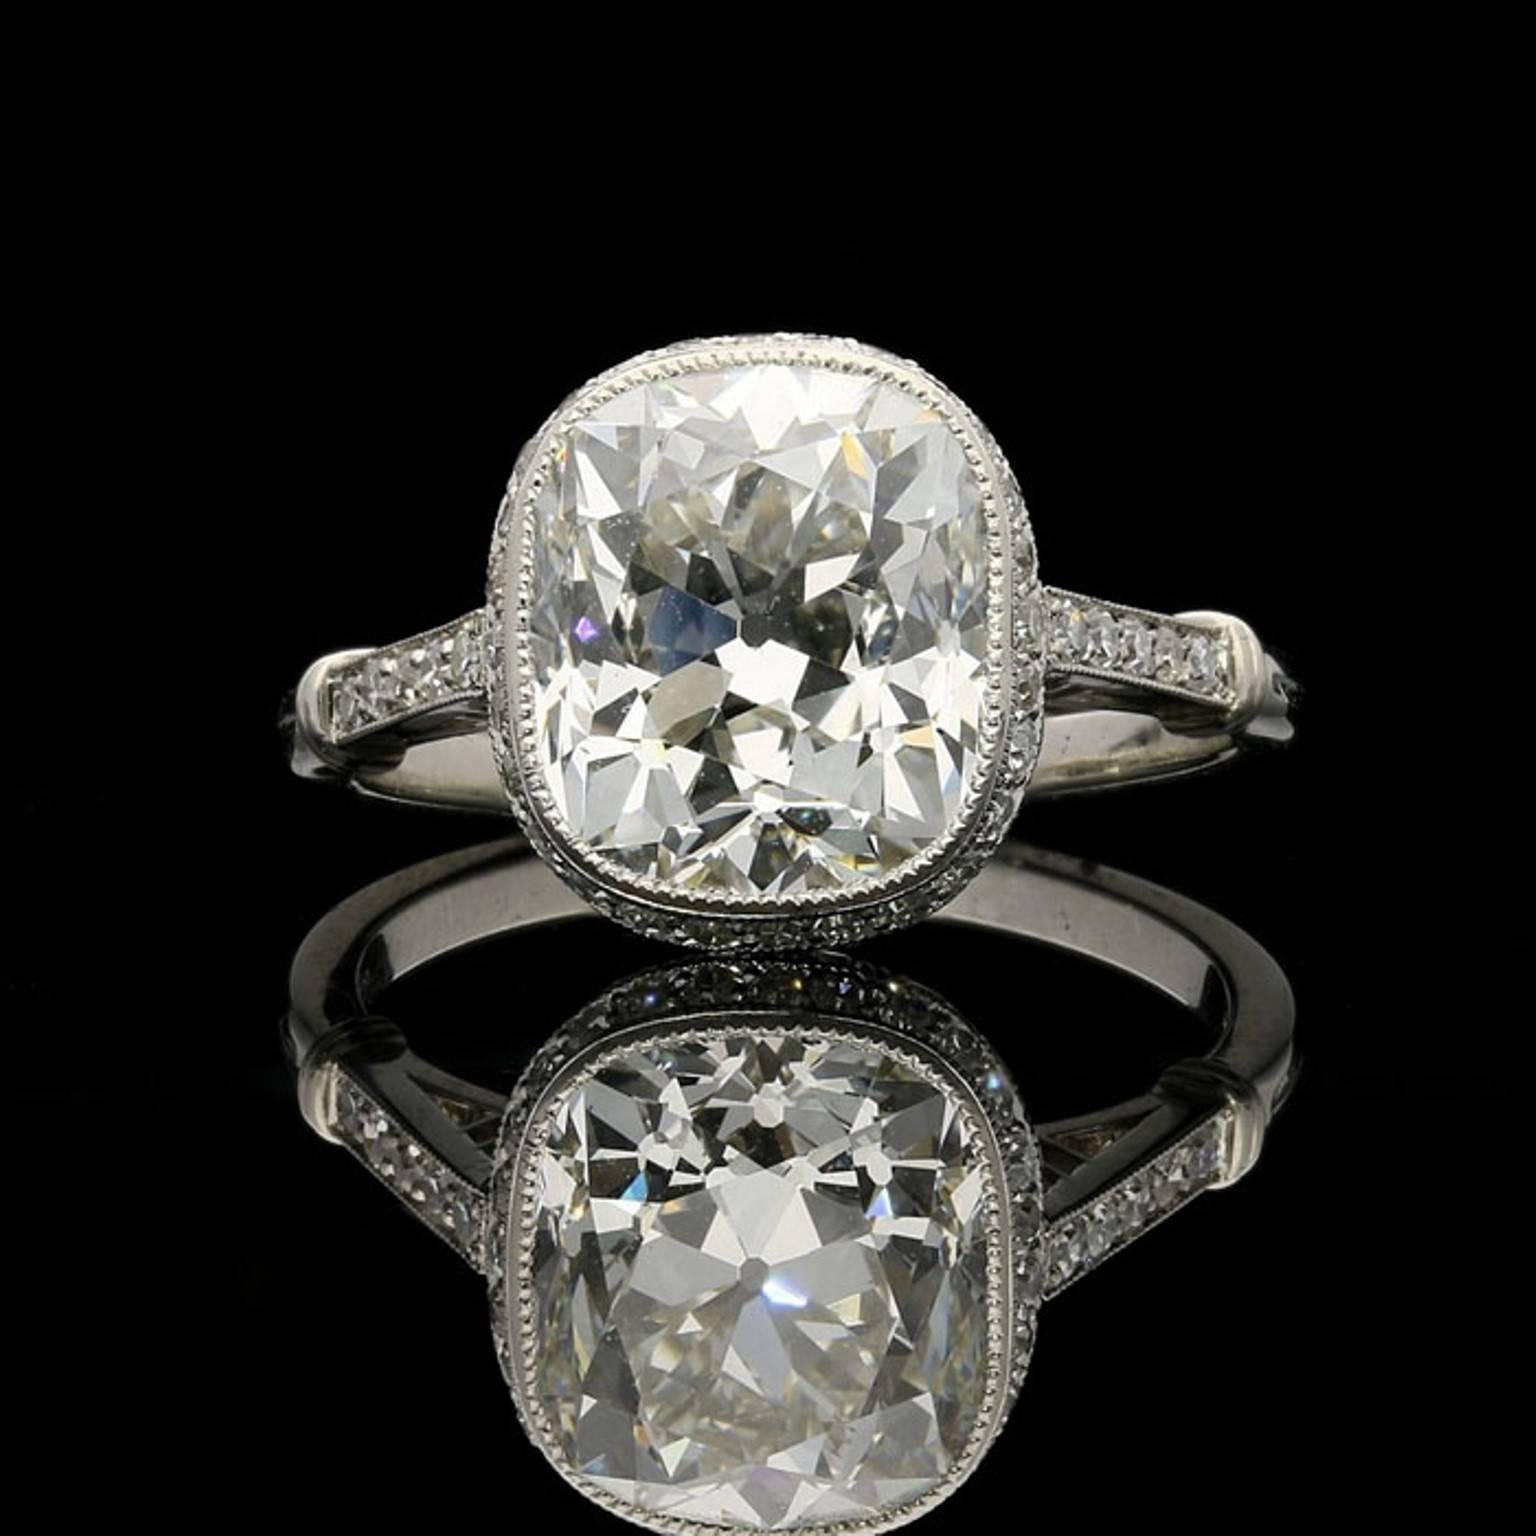 A stunning old-cut diamond solitaire ring by Hancocks centred with a beautiful rectangular old mine brilliant cut diamond weighing 4.14 carats in a millegrain rubover setting to a finely pierced cupped gallery set throughout with rows of single cut